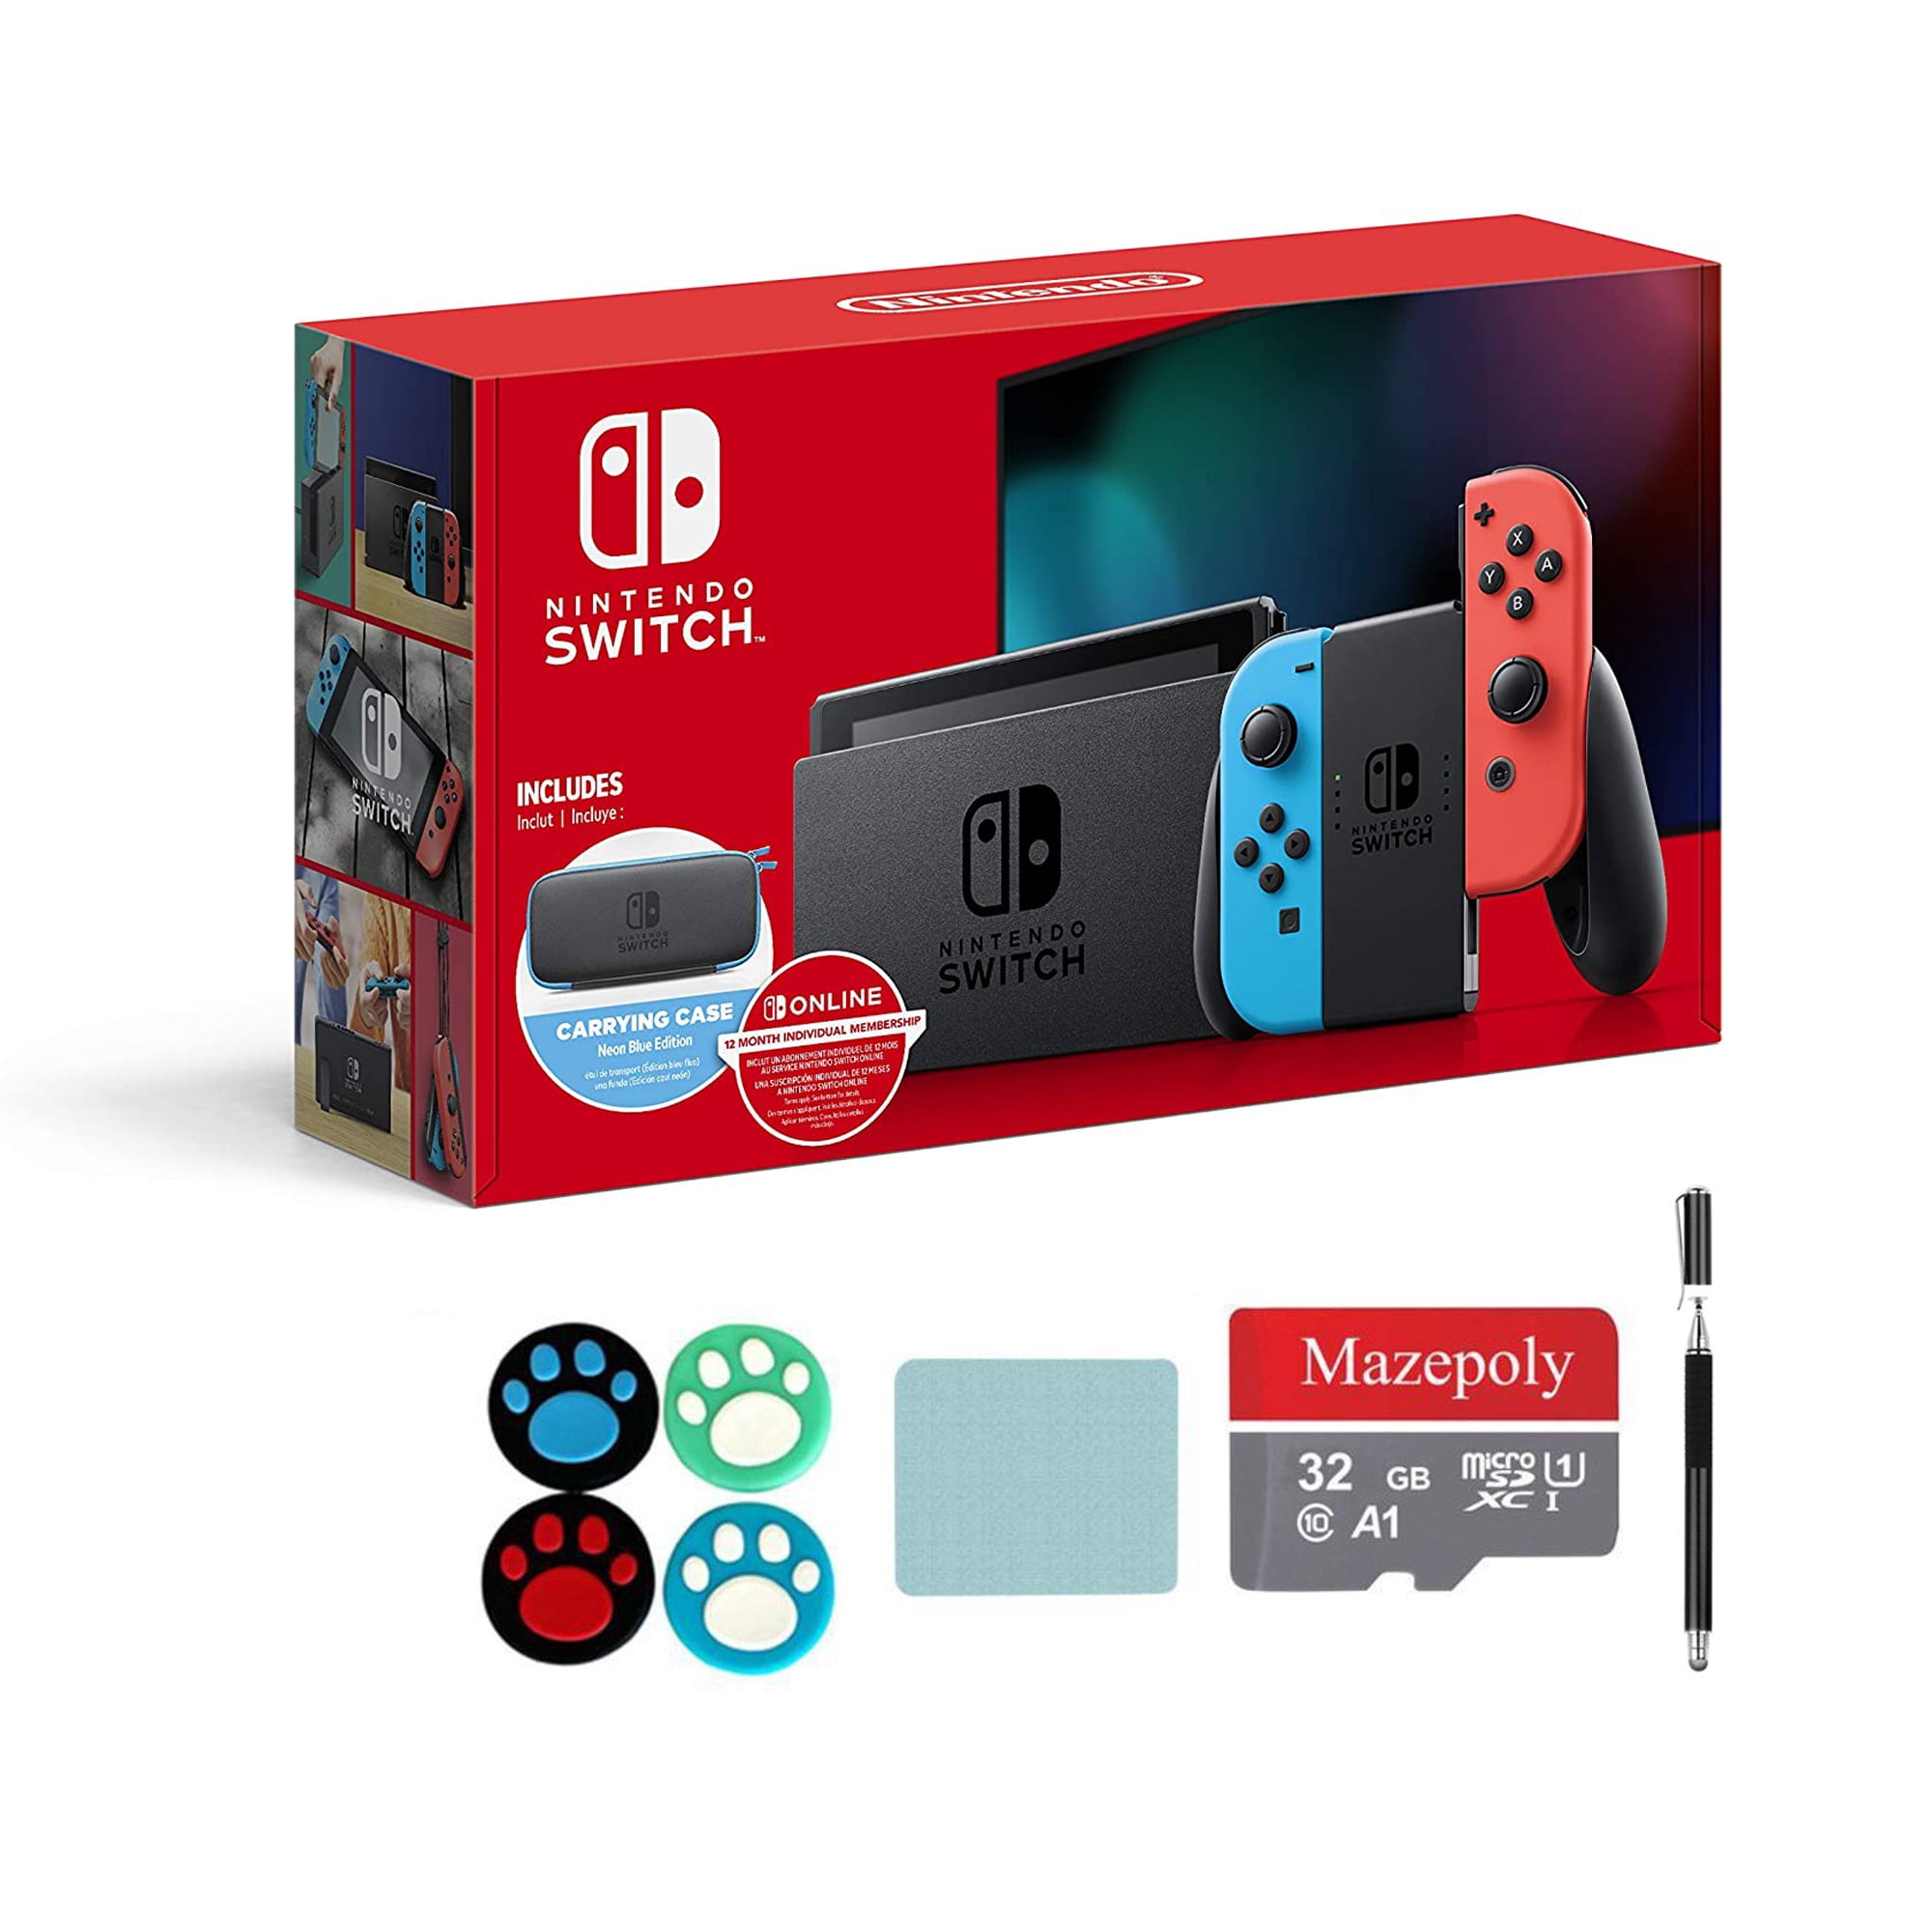 Switch Neon Joy-Con + 12 Month Membership + Carrying Case Mazepoly Accessories - Walmart.com